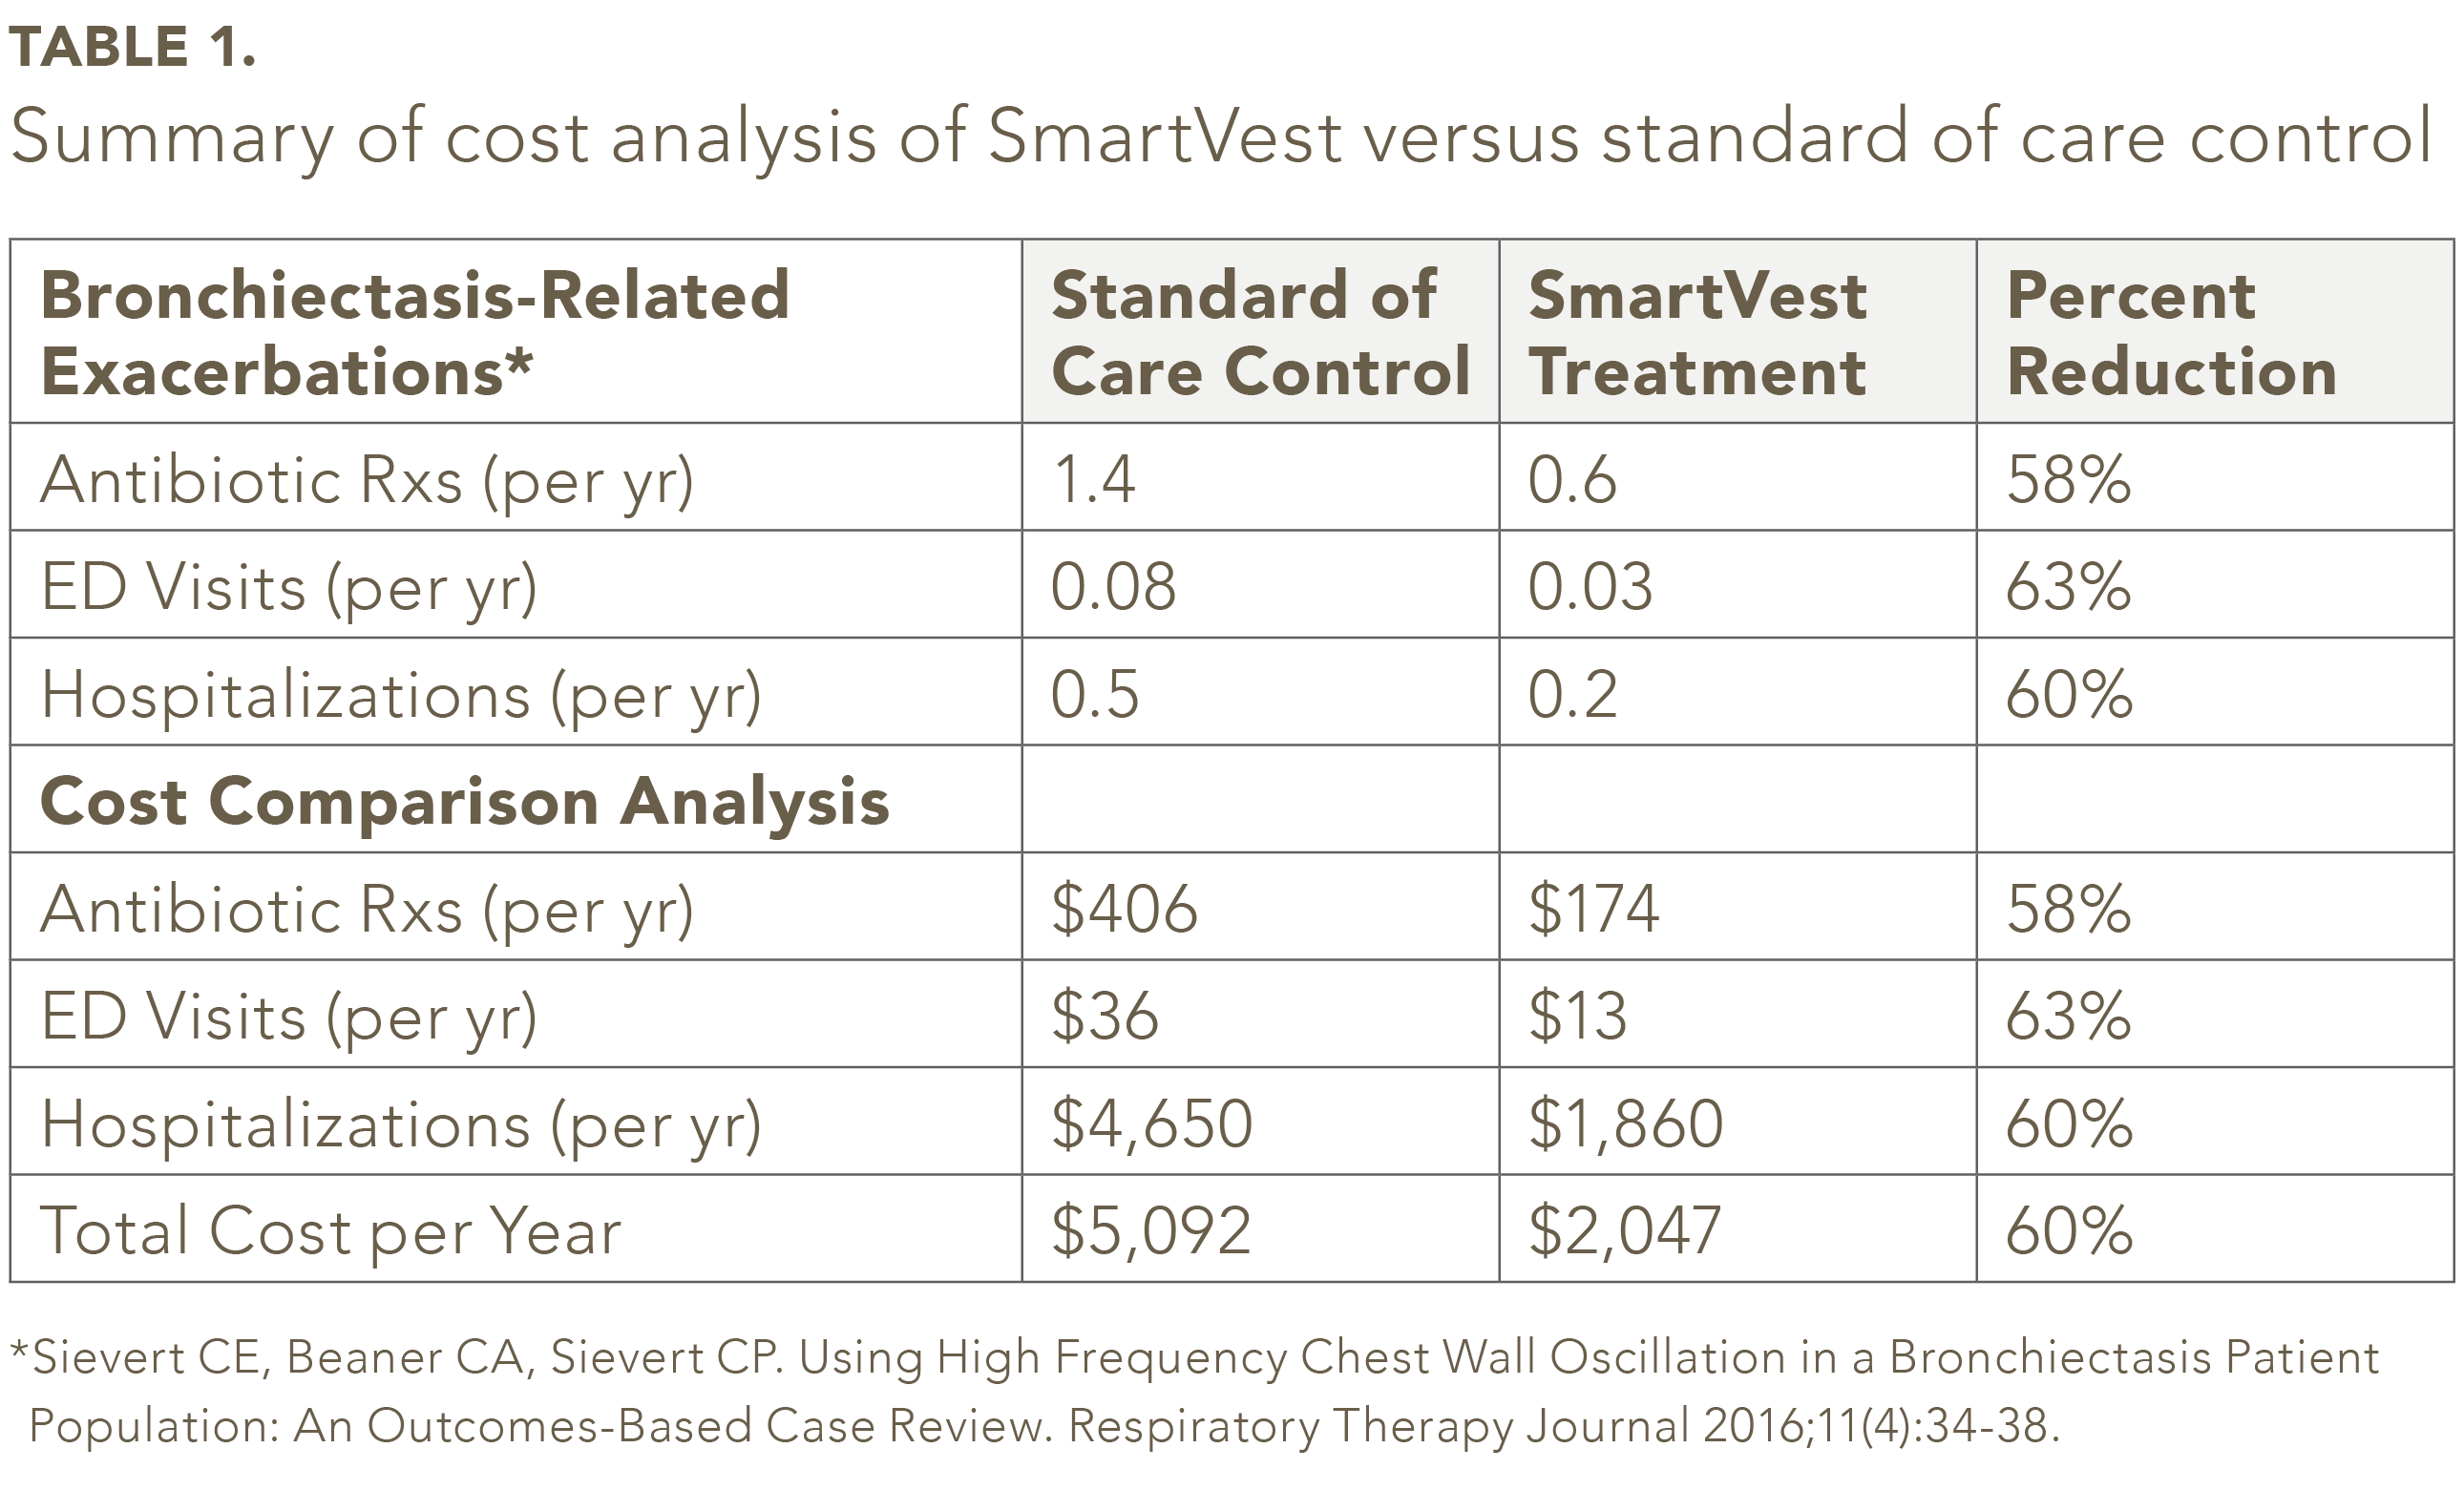 A table showing the costs of SmartVest vs the standard of care control